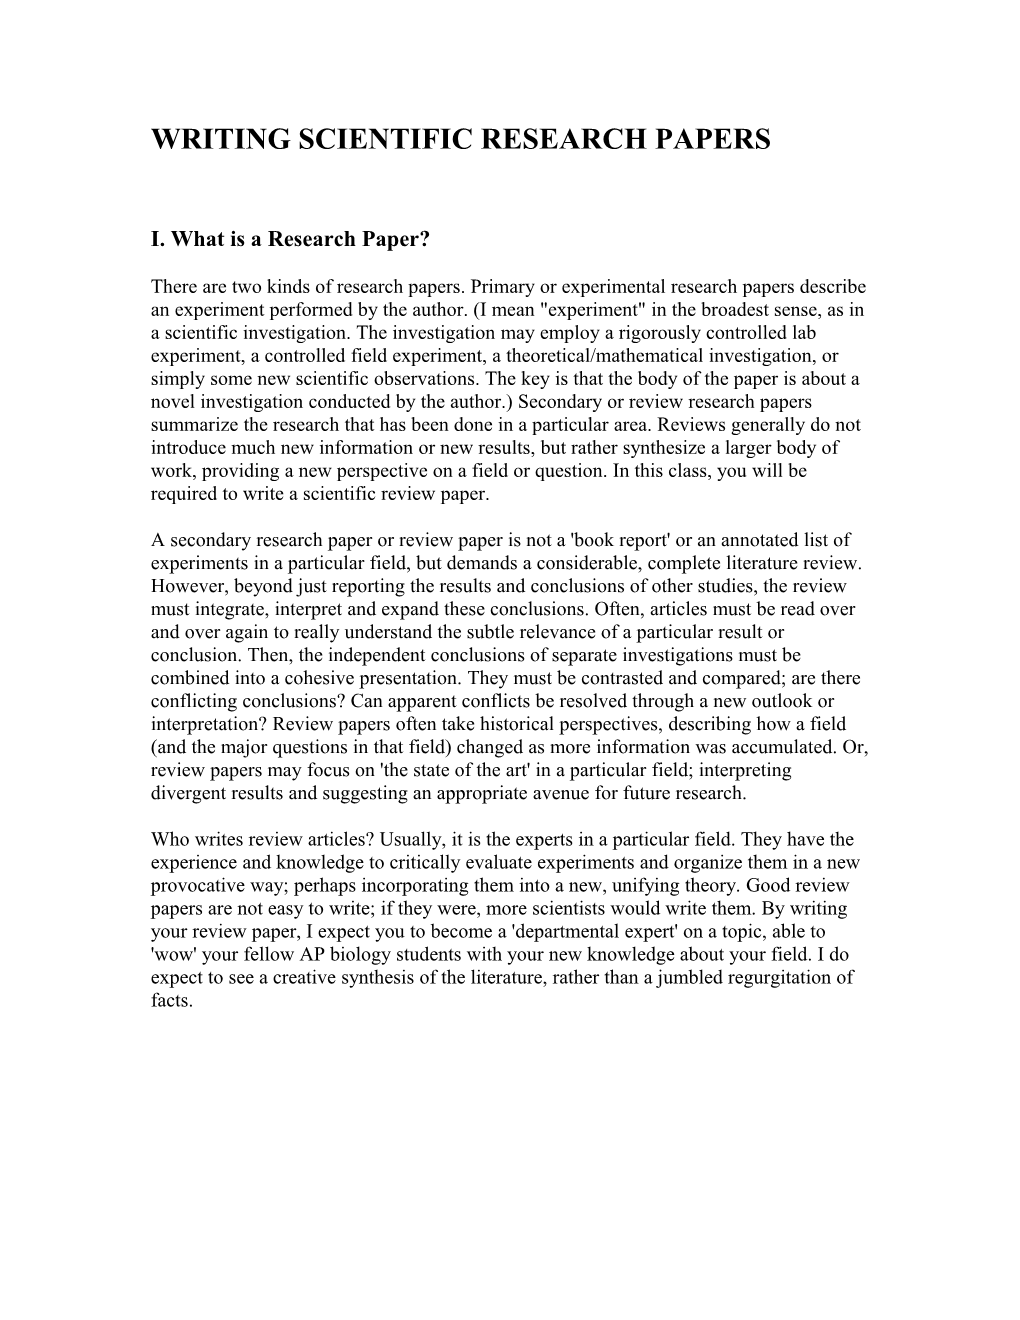 How to Write a Scientific Review Paper